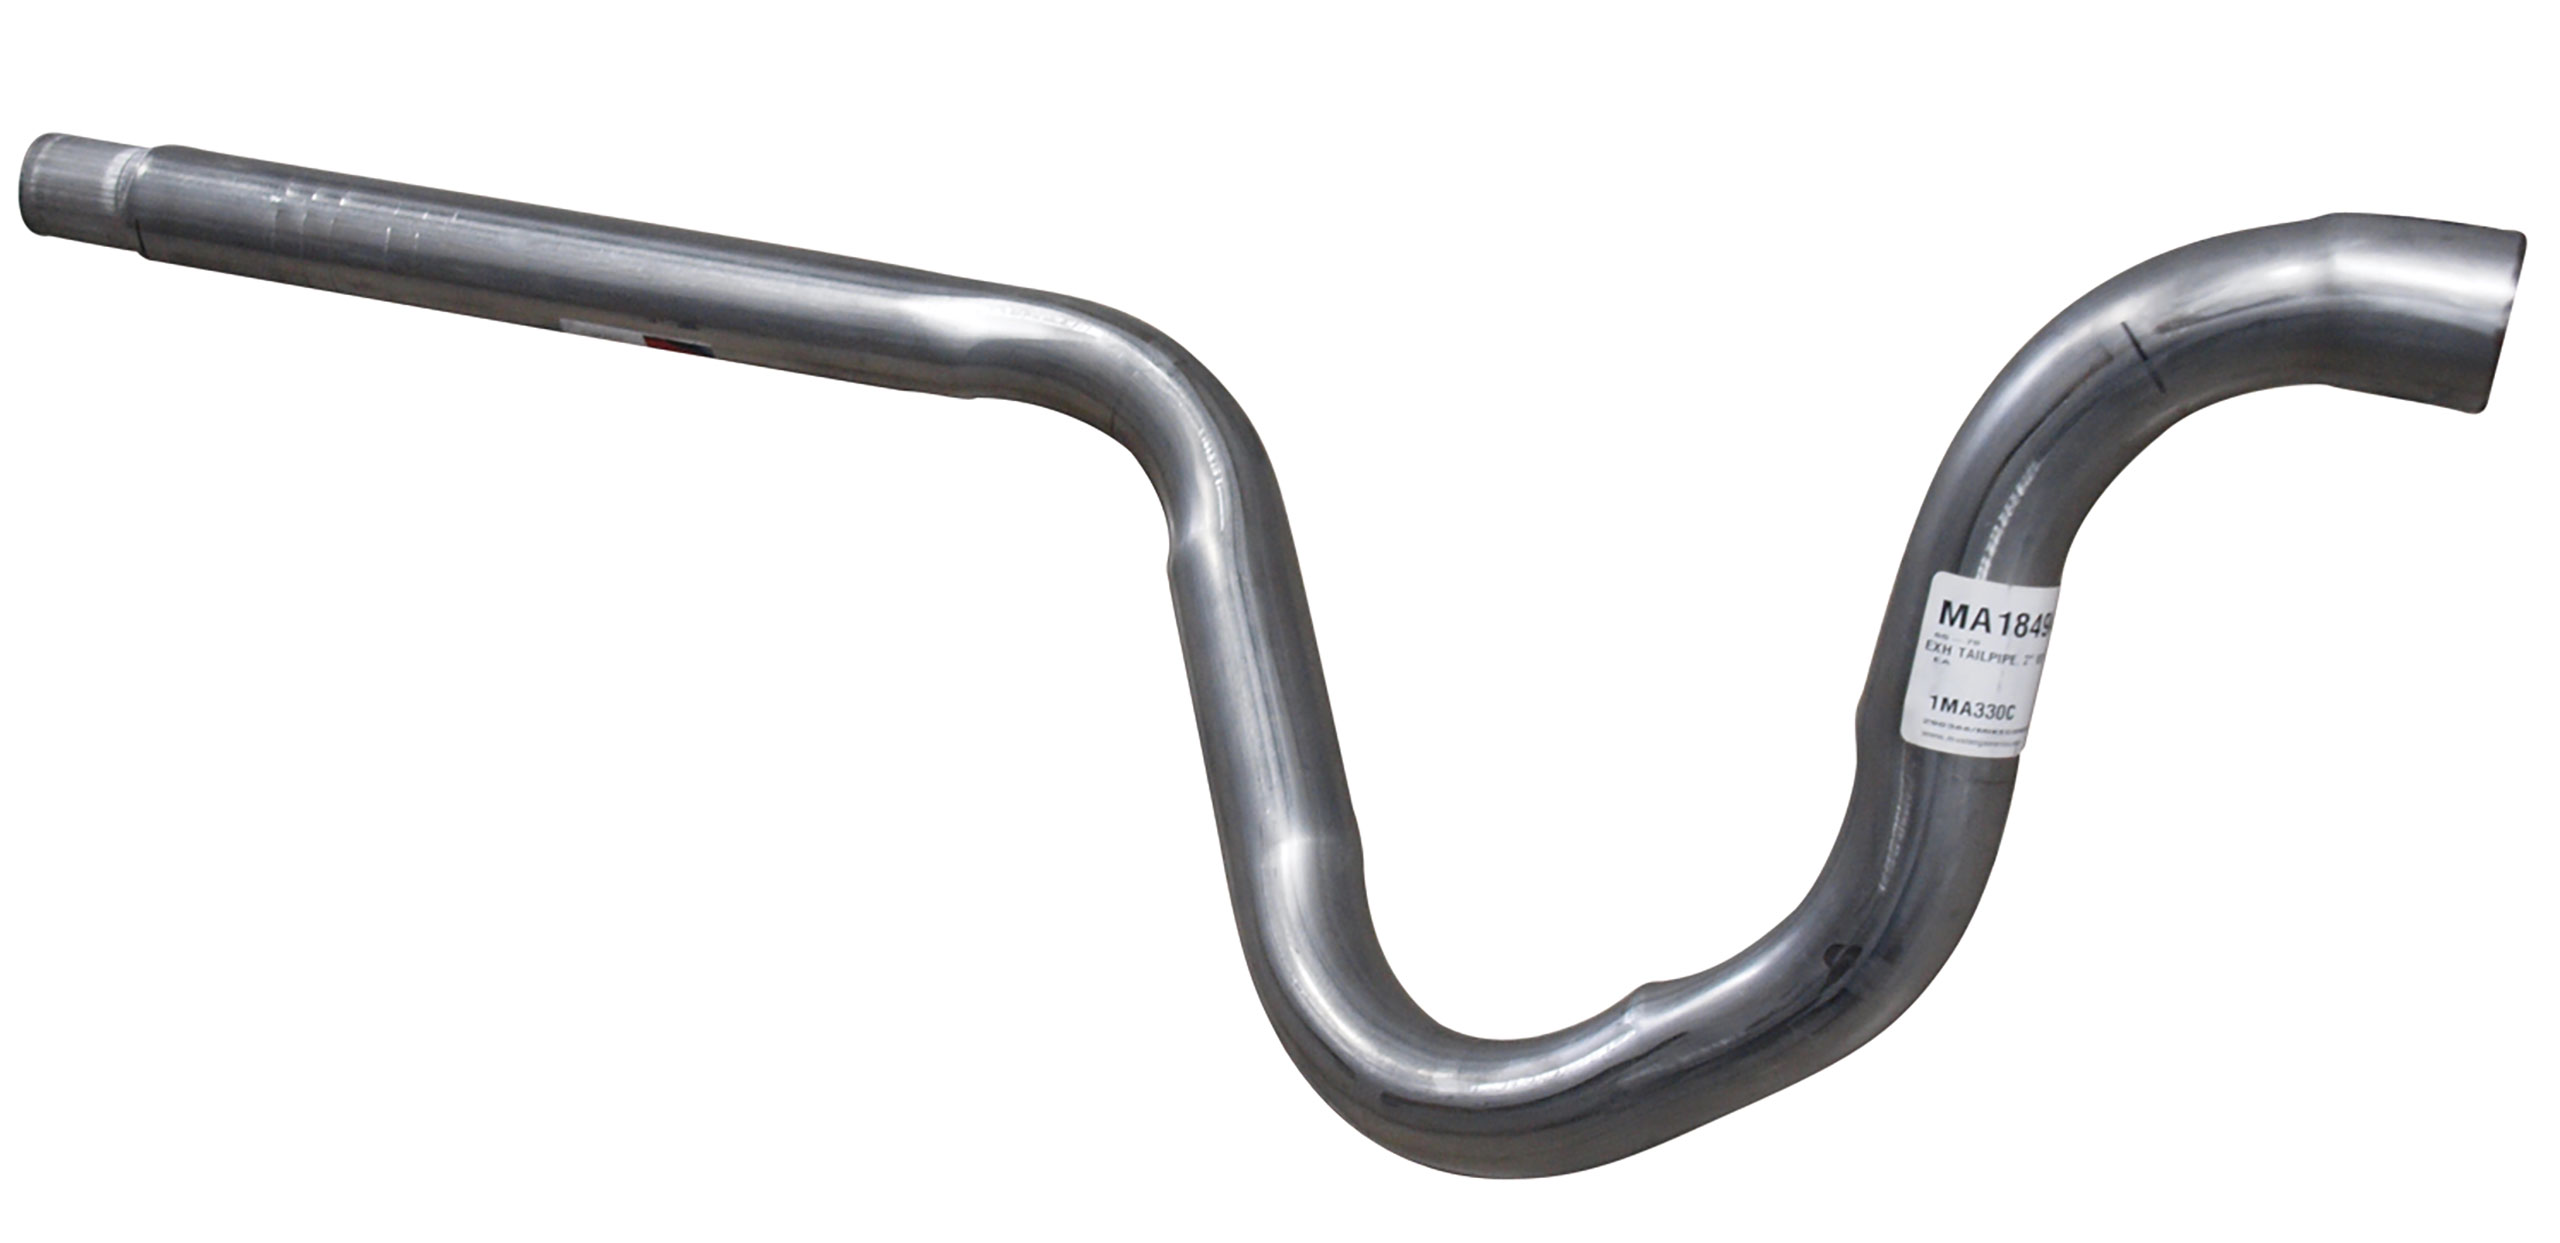 1965-1970 Ford Mustang Dual Exh Tailpipe - 2" W/1.75" Outlet - 289/302 W/O Resonator- RH